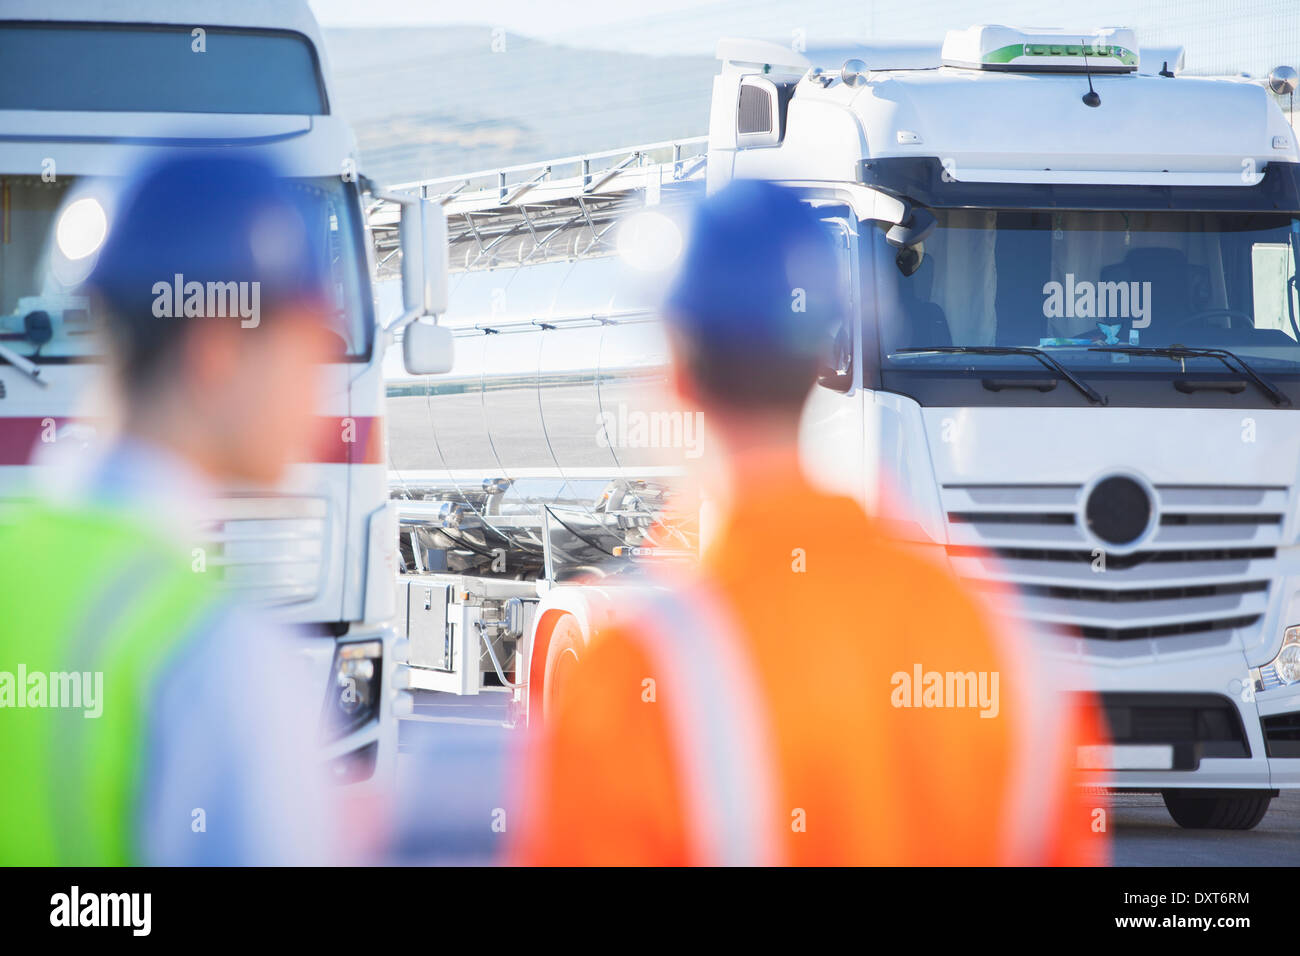 Workers looking at stainless steel milk tankers Stock Photo